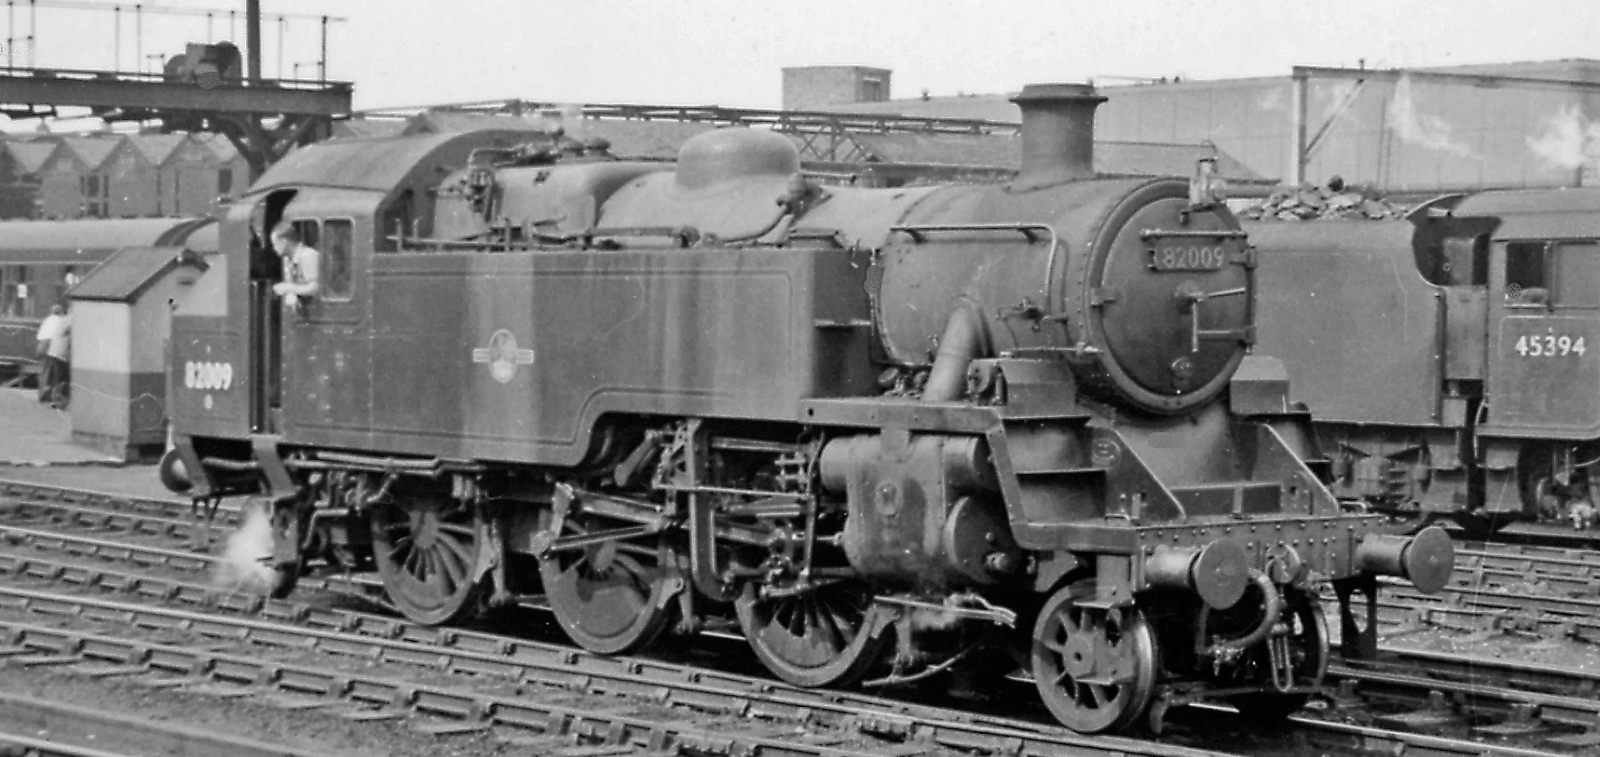 No. 82009 in July 1958 in Crewe